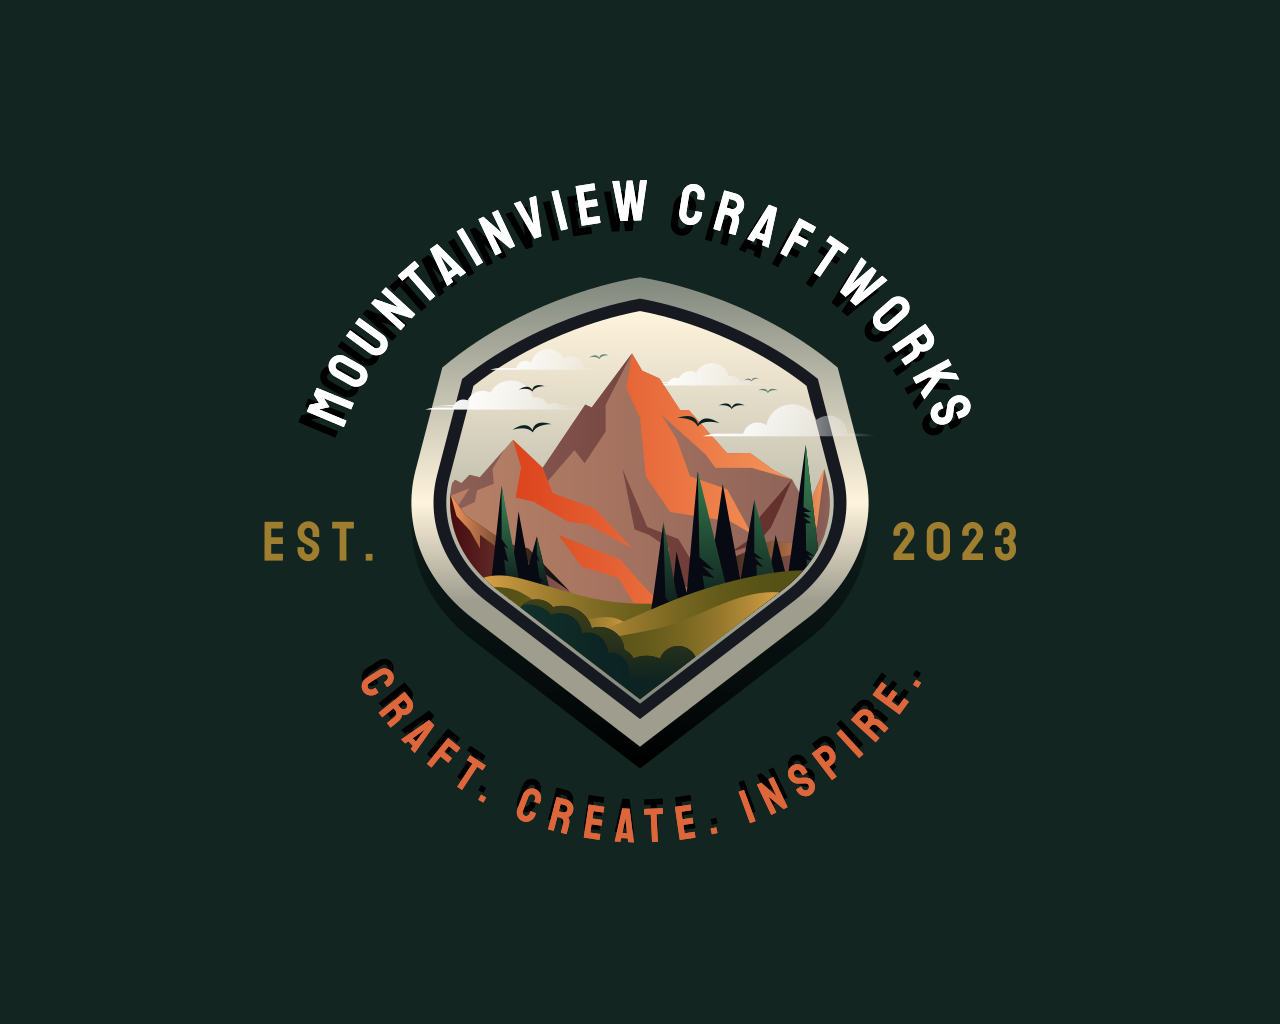 MountainView Craftworks